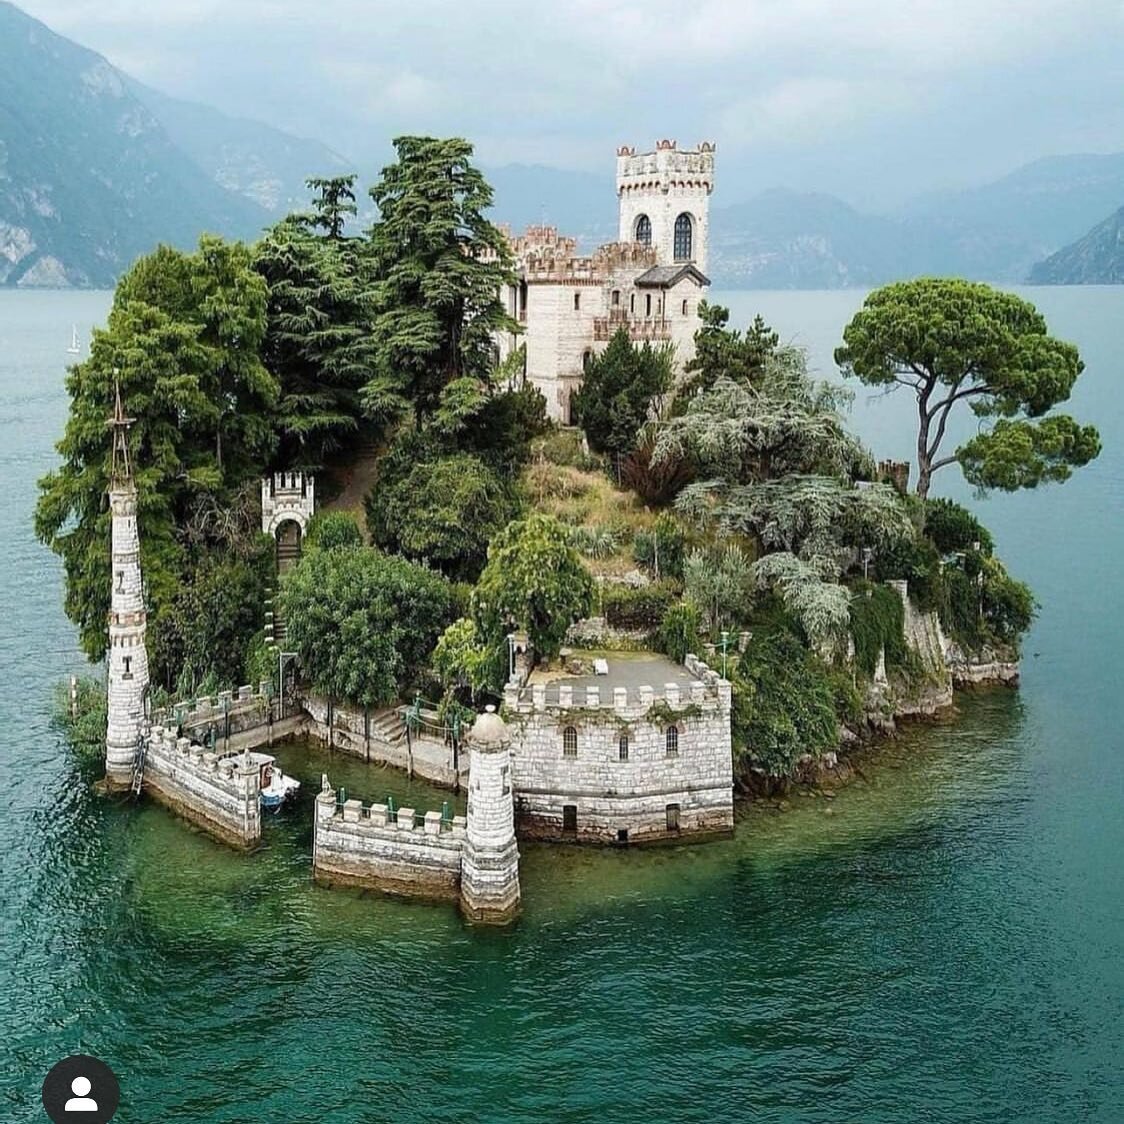 I want my own private island with a fairytale castle!!!! Wonder if They need an interior designer?
@map_of_italy #castello #isoladiloreto